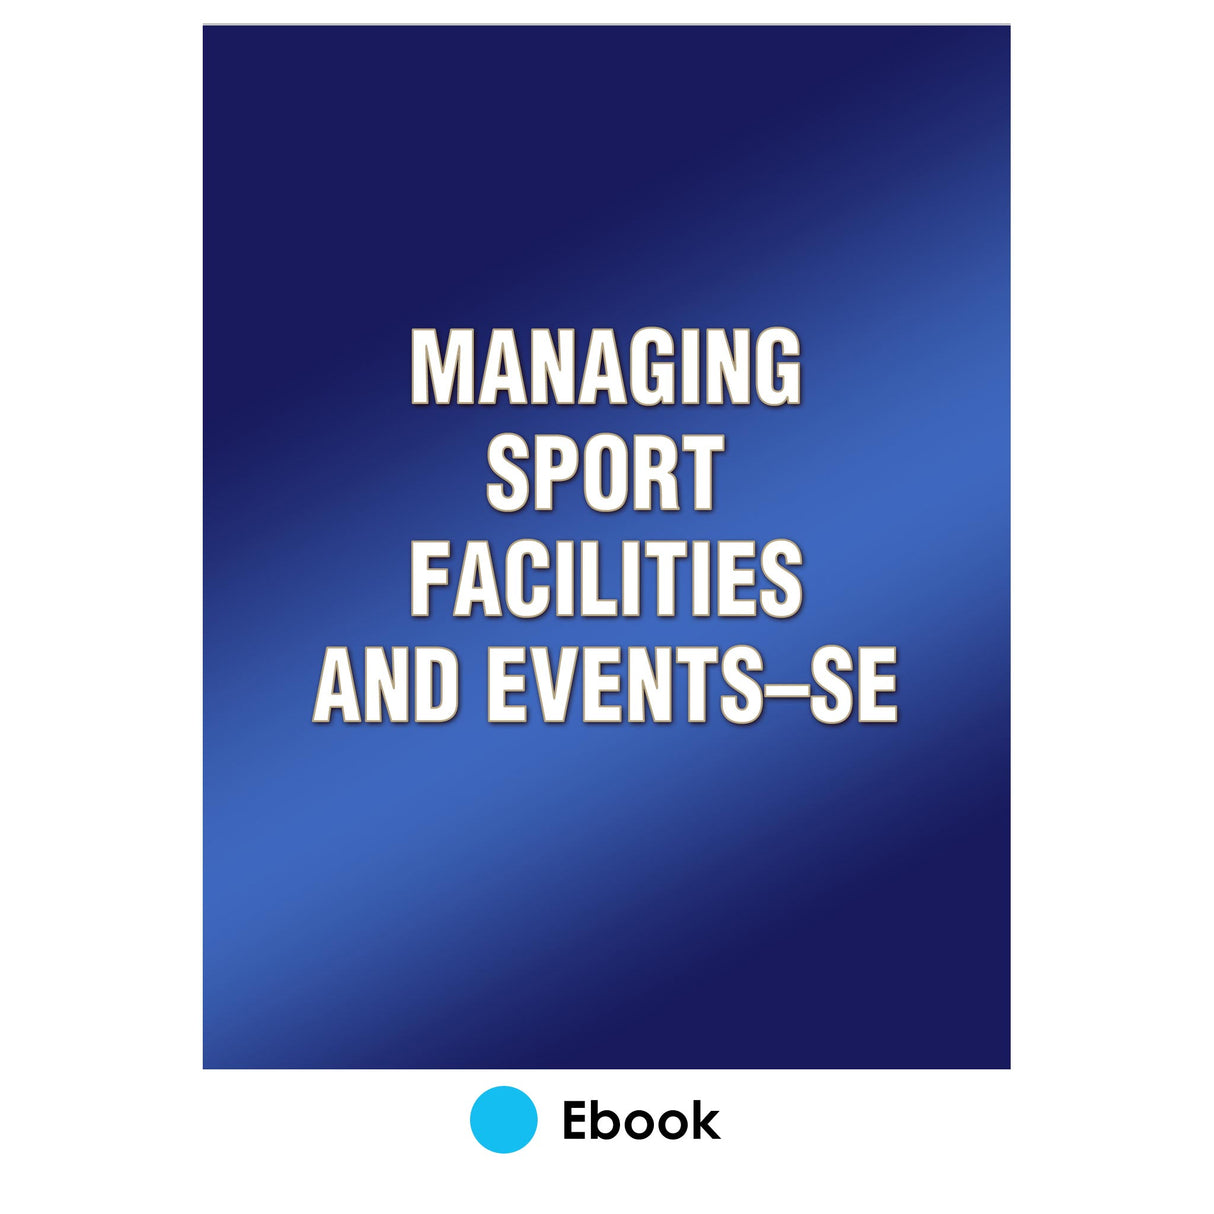 Managing Sport Facilities and Events-SE